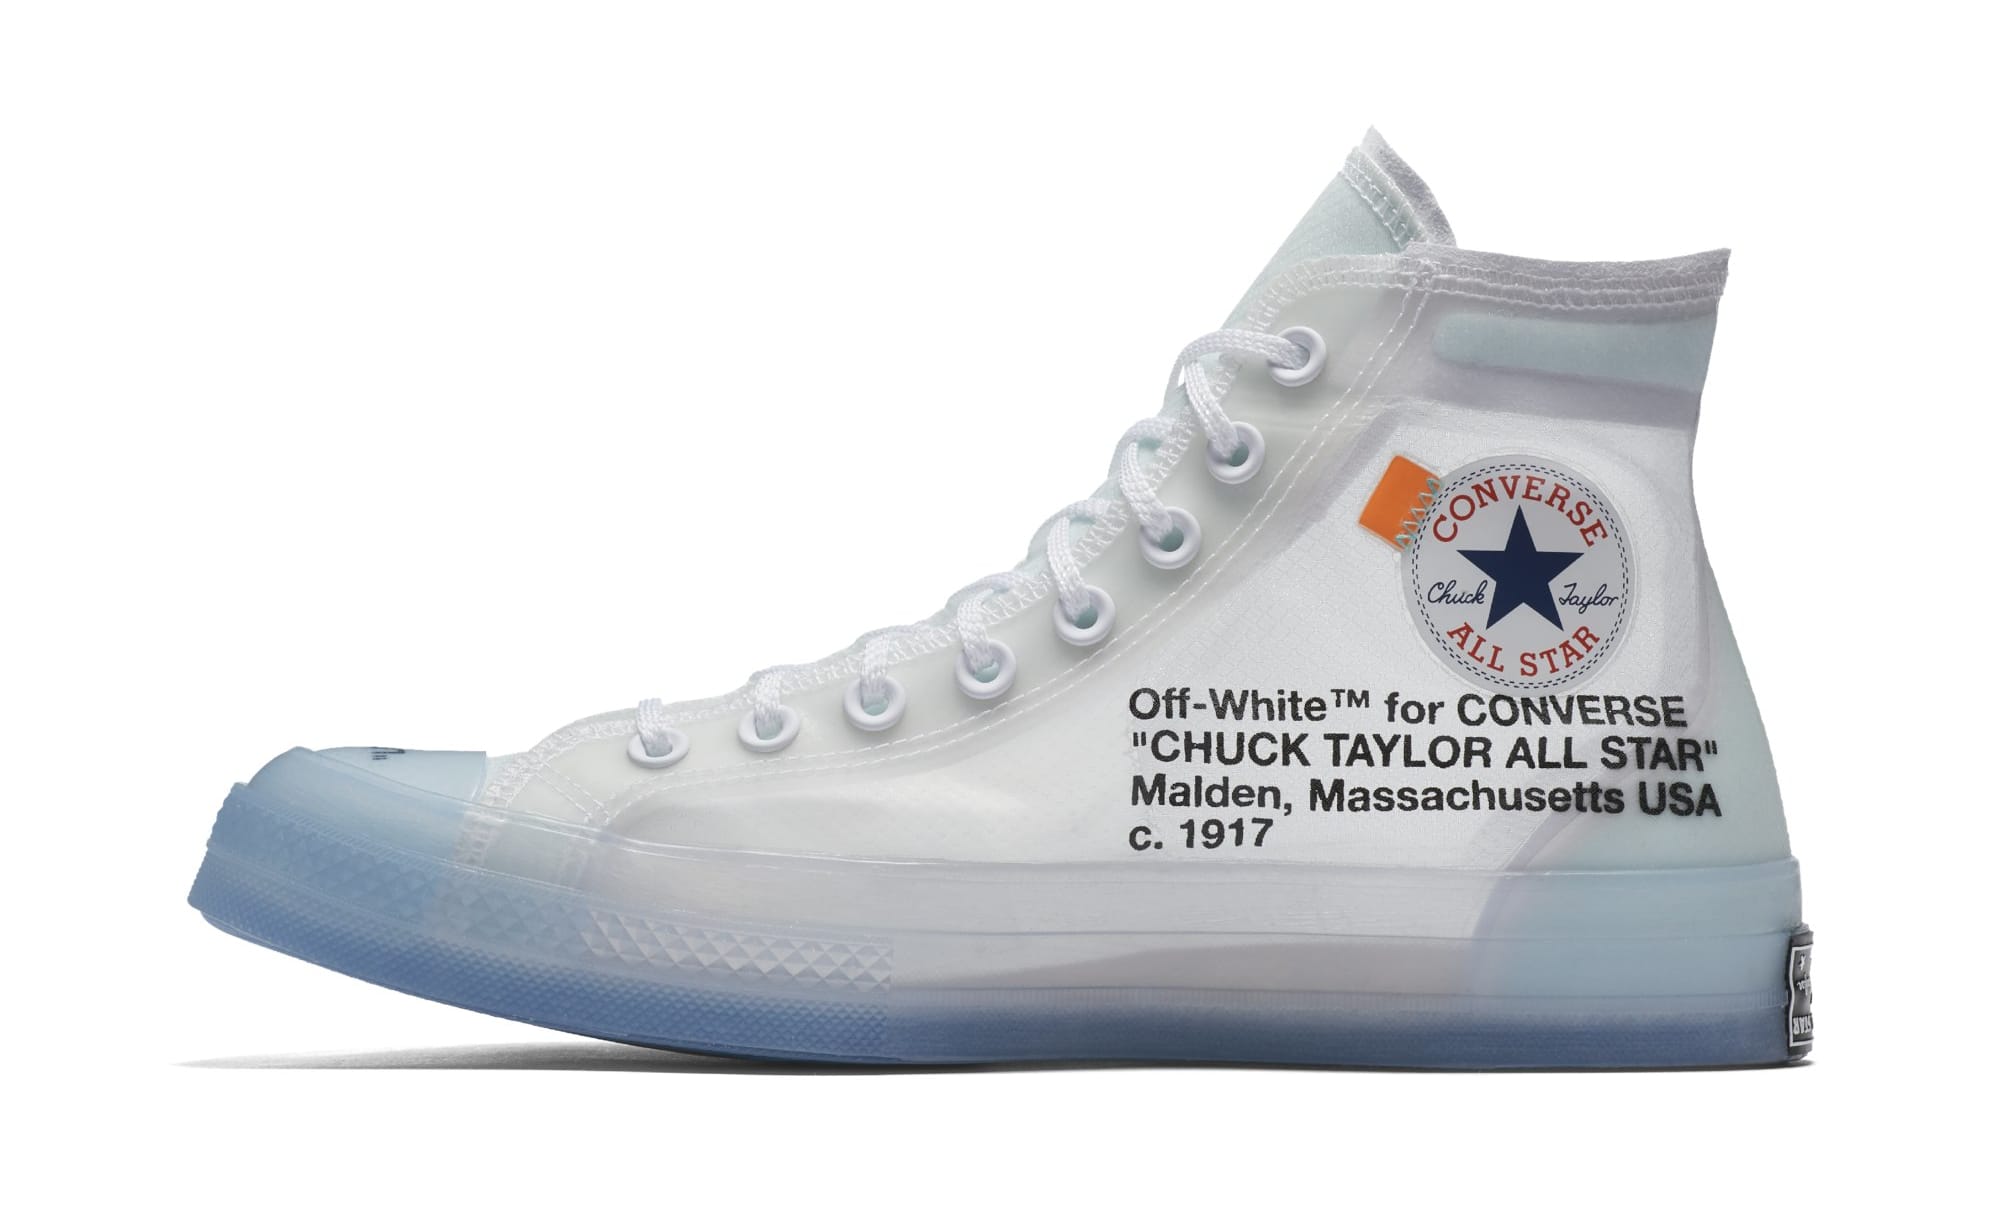 Off-White x Converse Chuck Taylor All Star 70 162204C-102 (Medial)